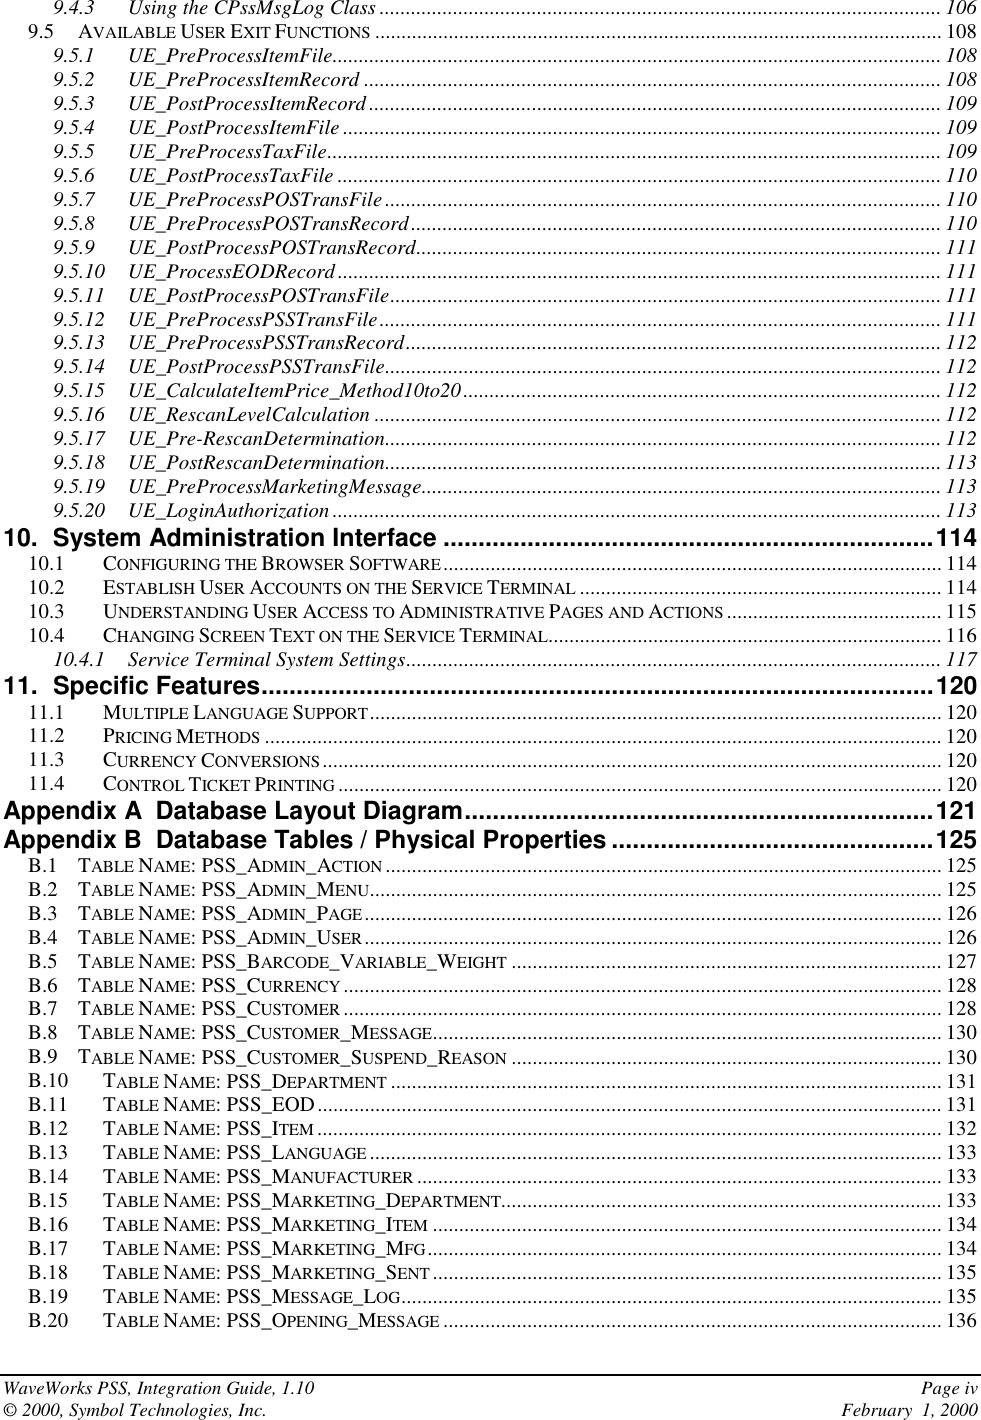 WaveWorks PSS, Integration Guide, 1.10 Page iv© 2000, Symbol Technologies, Inc. February  1, 20009.4.3 Using the CPssMsgLog Class ........................................................................................................... 1069.5 AVAILABLE USER EXIT FUNCTIONS ............................................................................................................ 1089.5.1 UE_PreProcessItemFile.................................................................................................................... 1089.5.2 UE_PreProcessItemRecord .............................................................................................................. 1089.5.3 UE_PostProcessItemRecord ............................................................................................................. 1099.5.4 UE_PostProcessItemFile .................................................................................................................. 1099.5.5 UE_PreProcessTaxFile..................................................................................................................... 1099.5.6 UE_PostProcessTaxFile ................................................................................................................... 1109.5.7 UE_PreProcessPOSTransFile.......................................................................................................... 1109.5.8 UE_PreProcessPOSTransRecord..................................................................................................... 1109.5.9 UE_PostProcessPOSTransRecord.................................................................................................... 1119.5.10 UE_ProcessEODRecord................................................................................................................... 1119.5.11 UE_PostProcessPOSTransFile......................................................................................................... 1119.5.12 UE_PreProcessPSSTransFile........................................................................................................... 1119.5.13 UE_PreProcessPSSTransRecord...................................................................................................... 1129.5.14 UE_PostProcessPSSTransFile.......................................................................................................... 1129.5.15 UE_CalculateItemPrice_Method10to20........................................................................................... 1129.5.16 UE_RescanLevelCalculation ............................................................................................................ 1129.5.17 UE_Pre-RescanDetermination.......................................................................................................... 1129.5.18 UE_PostRescanDetermination.......................................................................................................... 1139.5.19 UE_PreProcessMarketingMessage................................................................................................... 1139.5.20 UE_LoginAuthorization .................................................................................................................... 11310. System Administration Interface ......................................................................11410.1 CONFIGURING THE BROWSER SOFTWARE............................................................................................... 11410.2 ESTABLISH USER ACCOUNTS ON THE SERVICE TERMINAL ..................................................................... 11410.3 UNDERSTANDING USER ACCESS TO ADMINISTRATIVE PAGES AND ACTIONS ......................................... 11510.4 CHANGING SCREEN TEXT ON THE SERVICE TERMINAL........................................................................... 11610.4.1 Service Terminal System Settings...................................................................................................... 11711. Specific Features................................................................................................12011.1 MULTIPLE LANGUAGE SUPPORT............................................................................................................. 12011.2 PRICING METHODS ................................................................................................................................. 12011.3 CURRENCY CONVERSIONS...................................................................................................................... 12011.4 CONTROL TICKET PRINTING ................................................................................................................... 120Appendix A  Database Layout Diagram...................................................................121Appendix B  Database Tables / Physical Properties ..............................................125B.1 TABLE NAME: PSS_ADMIN_ACTION .......................................................................................................... 125B.2 TABLE NAME: PSS_ADMIN_MENU............................................................................................................. 125B.3 TABLE NAME: PSS_ADMIN_PAGE.............................................................................................................. 126B.4 TABLE NAME: PSS_ADMIN_USER.............................................................................................................. 126B.5 TABLE NAME: PSS_BARCODE_VARIABLE_WEIGHT .................................................................................. 127B.6 TABLE NAME: PSS_CURRENCY .................................................................................................................. 128B.7 TABLE NAME: PSS_CUSTOMER .................................................................................................................. 128B.8 TABLE NAME: PSS_CUSTOMER_MESSAGE................................................................................................. 130B.9 TABLE NAME: PSS_CUSTOMER_SUSPEND_REASON .................................................................................. 130B.10 TABLE NAME: PSS_DEPARTMENT ......................................................................................................... 131B.11 TABLE NAME: PSS_EOD....................................................................................................................... 131B.12 TABLE NAME: PSS_ITEM ....................................................................................................................... 132B.13 TABLE NAME: PSS_LANGUAGE ............................................................................................................. 133B.14 TABLE NAME: PSS_MANUFACTURER .................................................................................................... 133B.15 TABLE NAME: PSS_MARKETING_DEPARTMENT.................................................................................... 133B.16 TABLE NAME: PSS_MARKETING_ITEM ................................................................................................. 134B.17 TABLE NAME: PSS_MARKETING_MFG.................................................................................................. 134B.18 TABLE NAME: PSS_MARKETING_SENT ................................................................................................. 135B.19 TABLE NAME: PSS_MESSAGE_LOG....................................................................................................... 135B.20 TABLE NAME: PSS_OPENING_MESSAGE ............................................................................................... 136